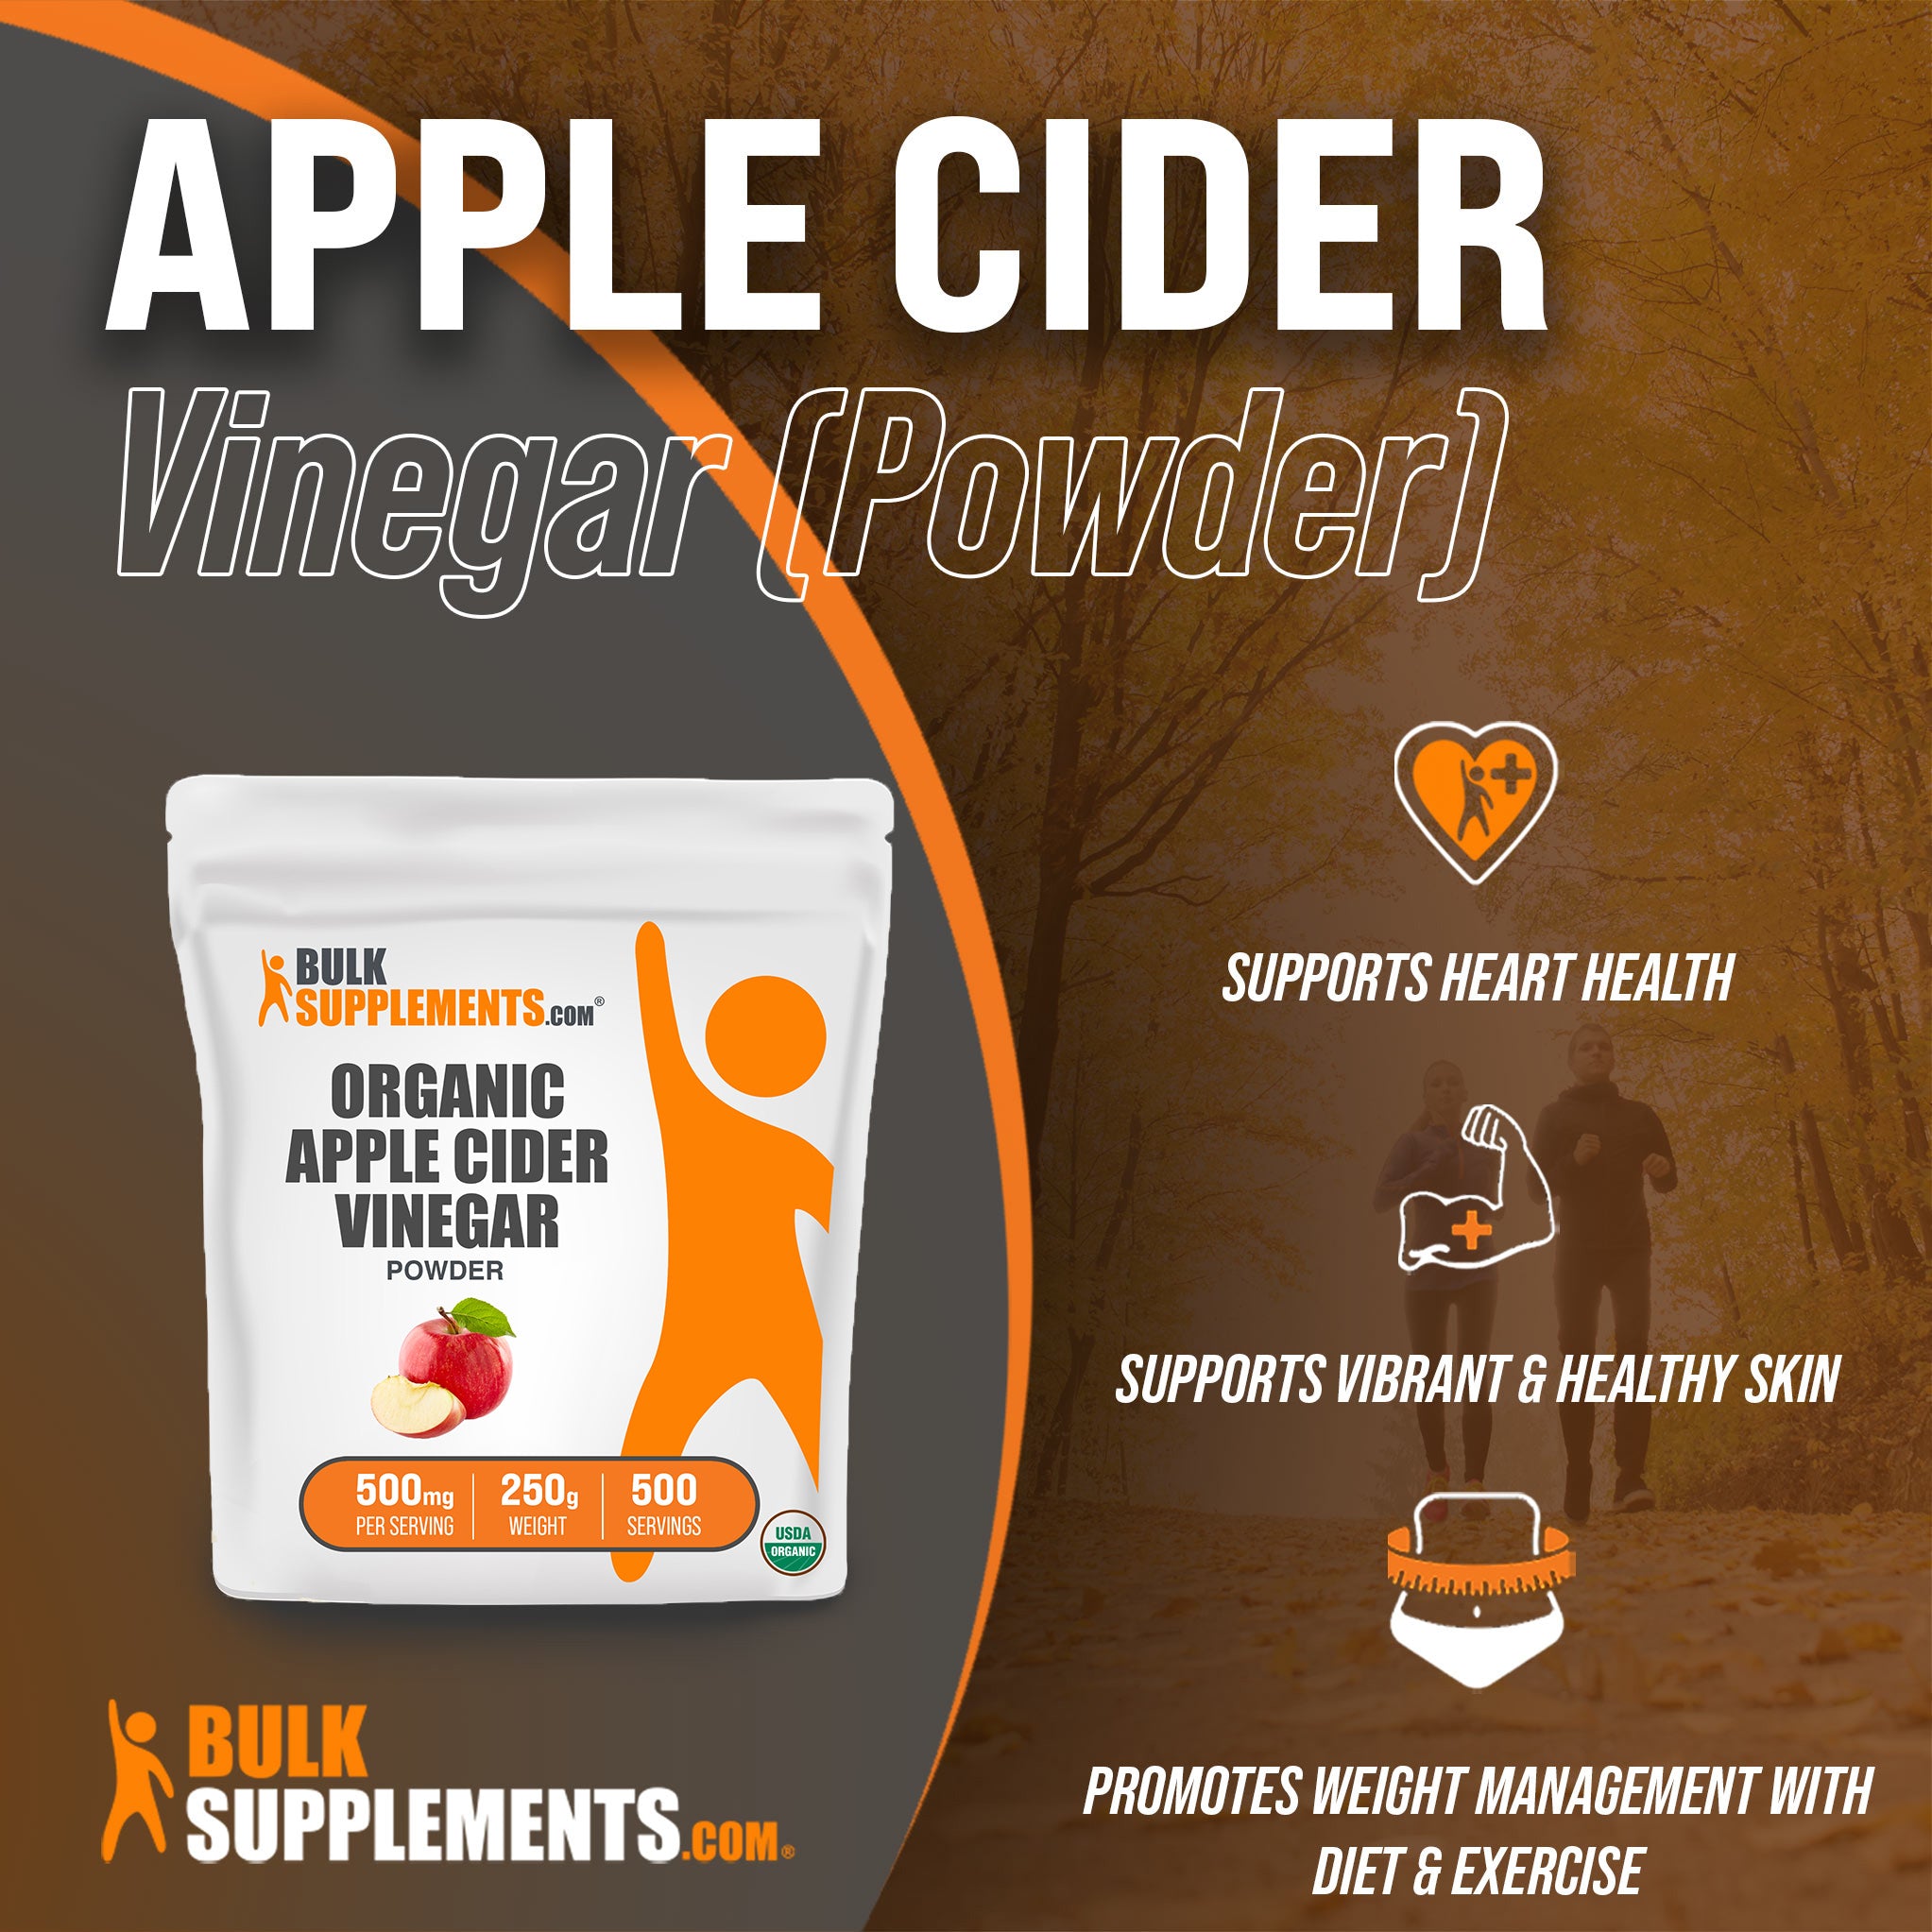 Benefits of Organic Apple Cider Vinegar Powder: supports heart health, supports vibrant and healthy skin, promotes weight management with diet and exercise